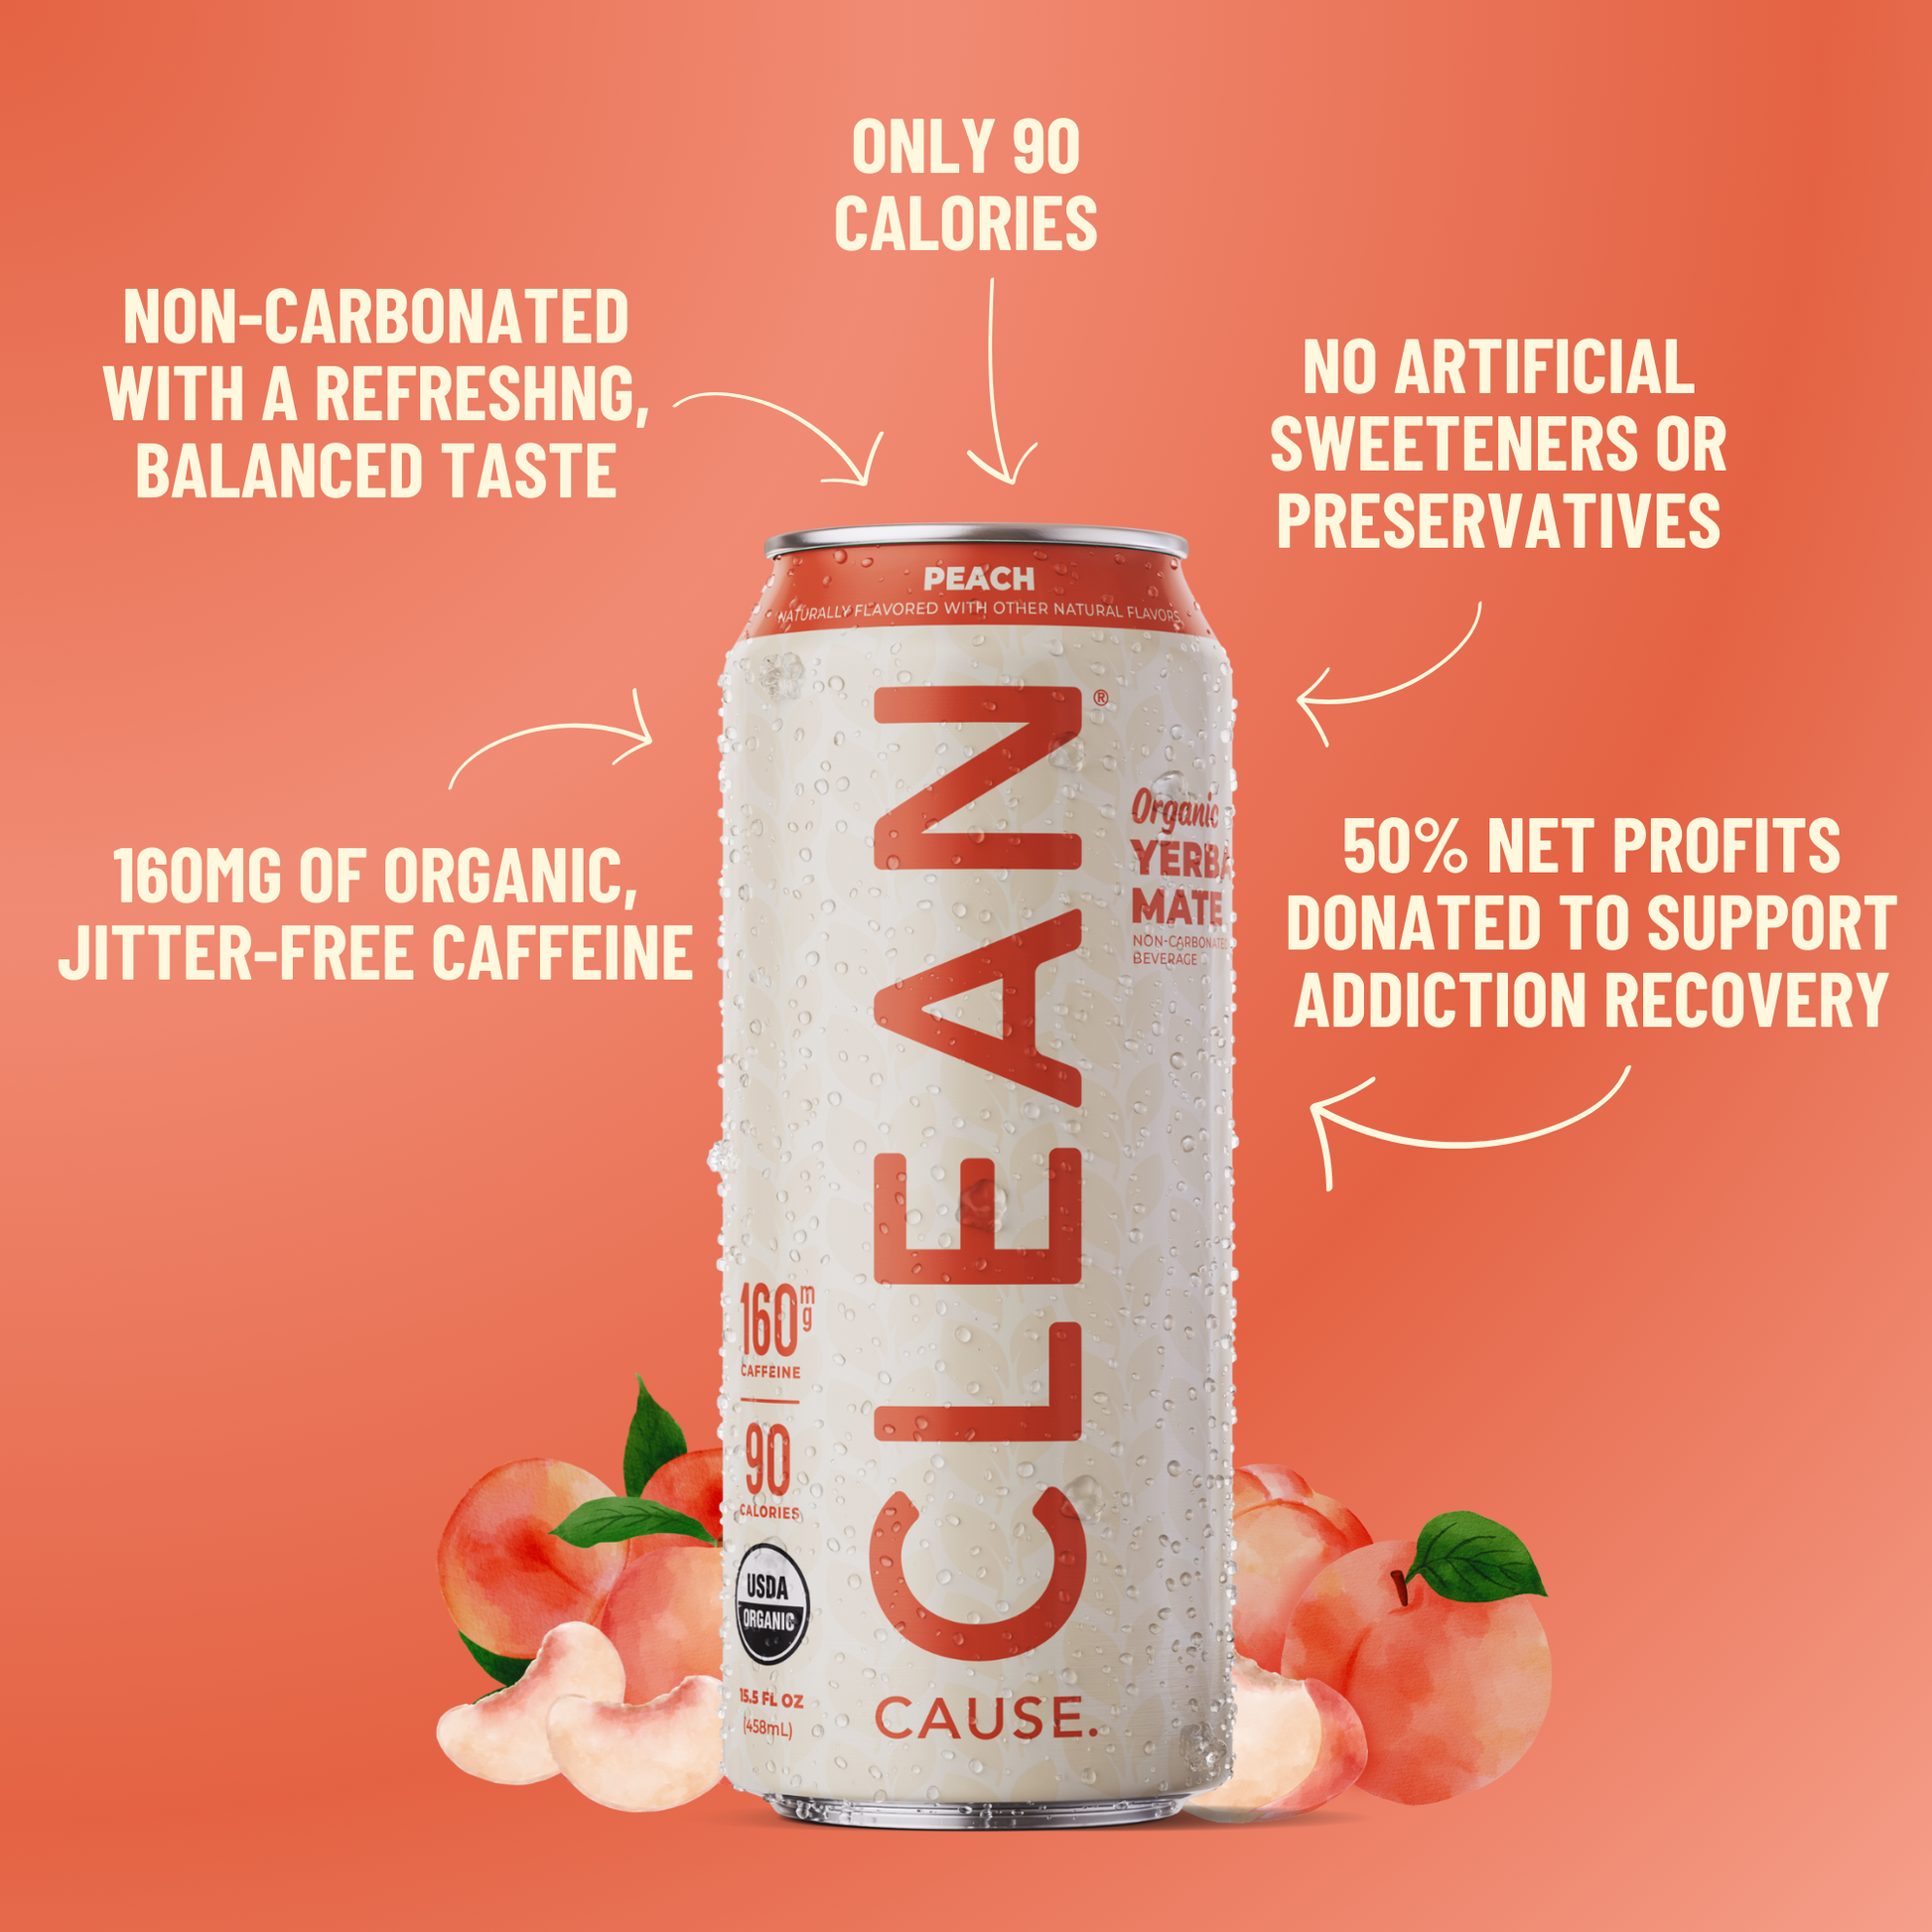 A can of CLEAN Cause Non-Carbonated Peach with little attributes circling it: 160mg of organic jitter-free caffeine, only 90 calories, no artificial sweetners or preservatives, 50% net profits support addiction recovery